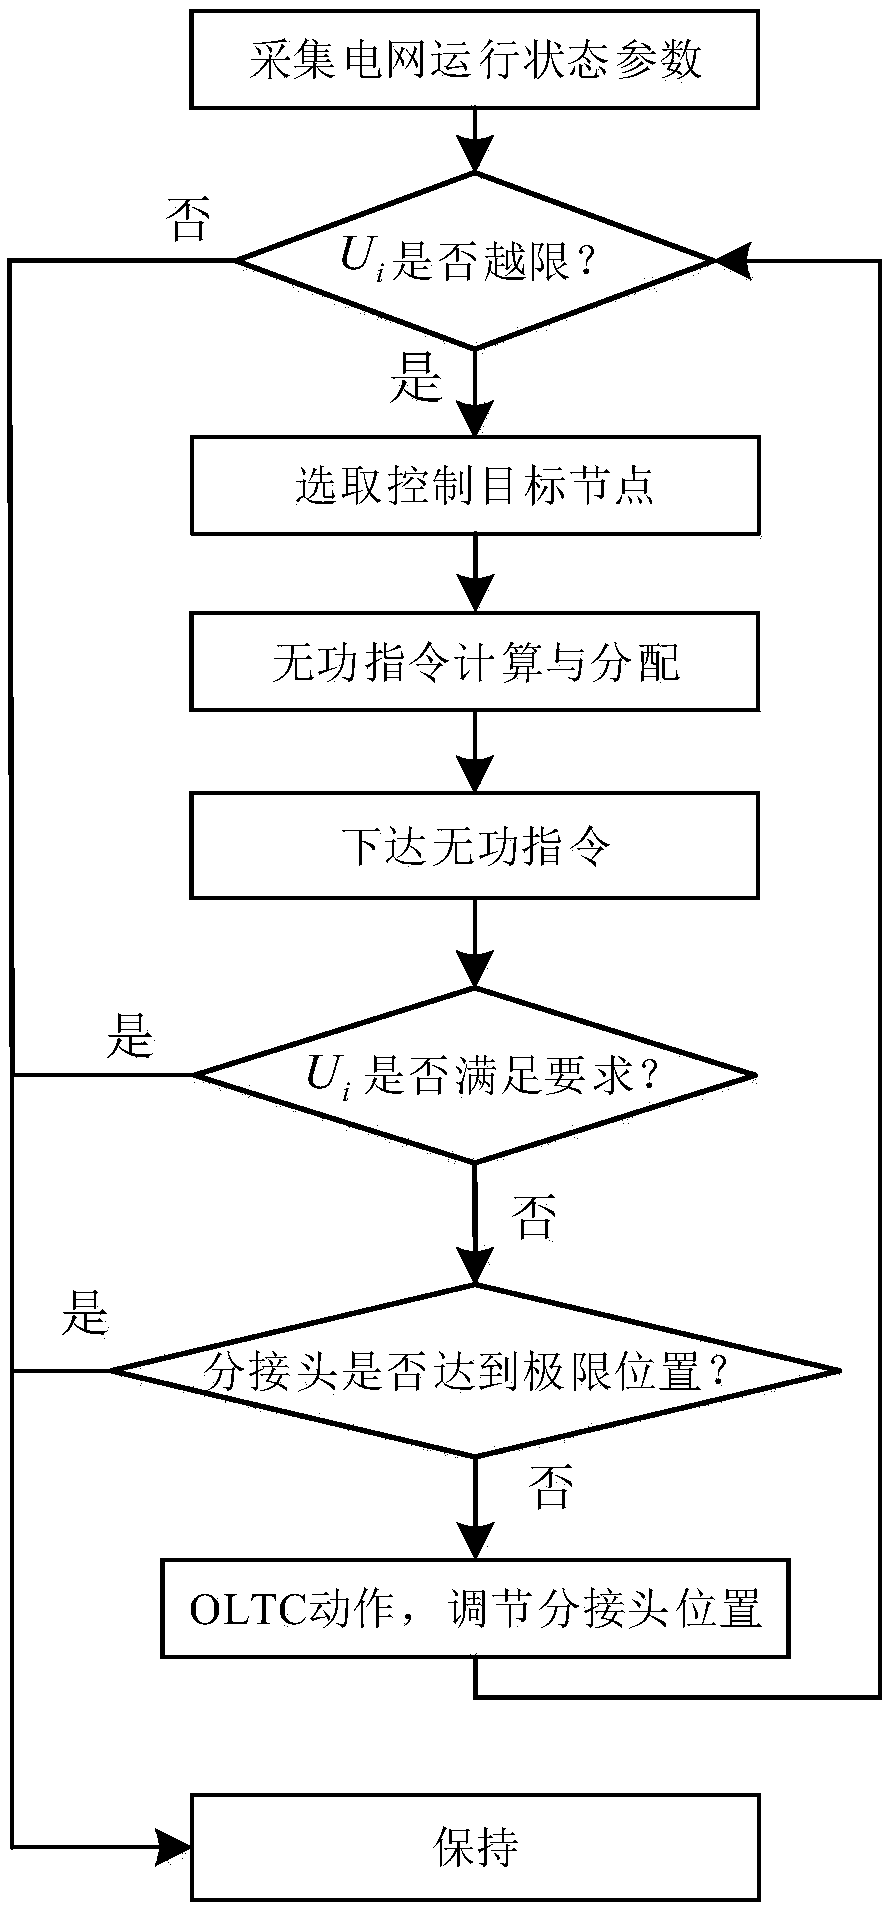 Voltage coordinated control method for decentralized wind power connection to a hybrid distribution network